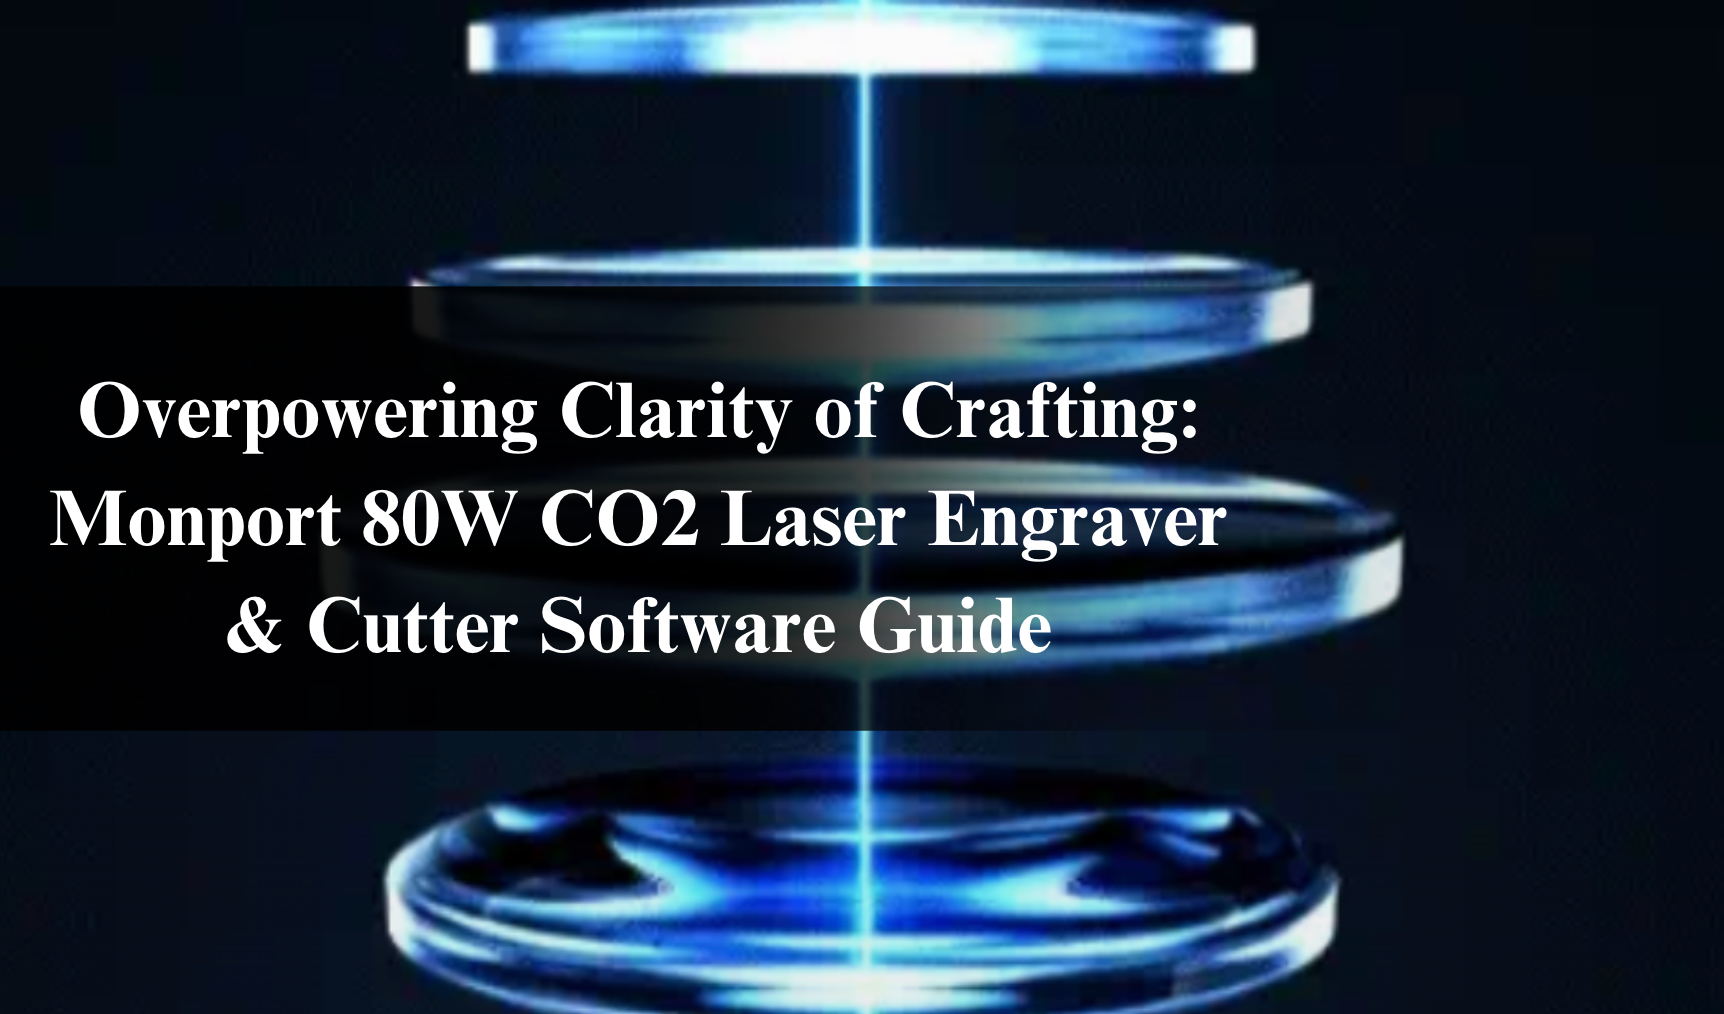 Overpowering Clarity of Crafting: Monport 80W CO2 Laser Engraver & Cutter Software Guide